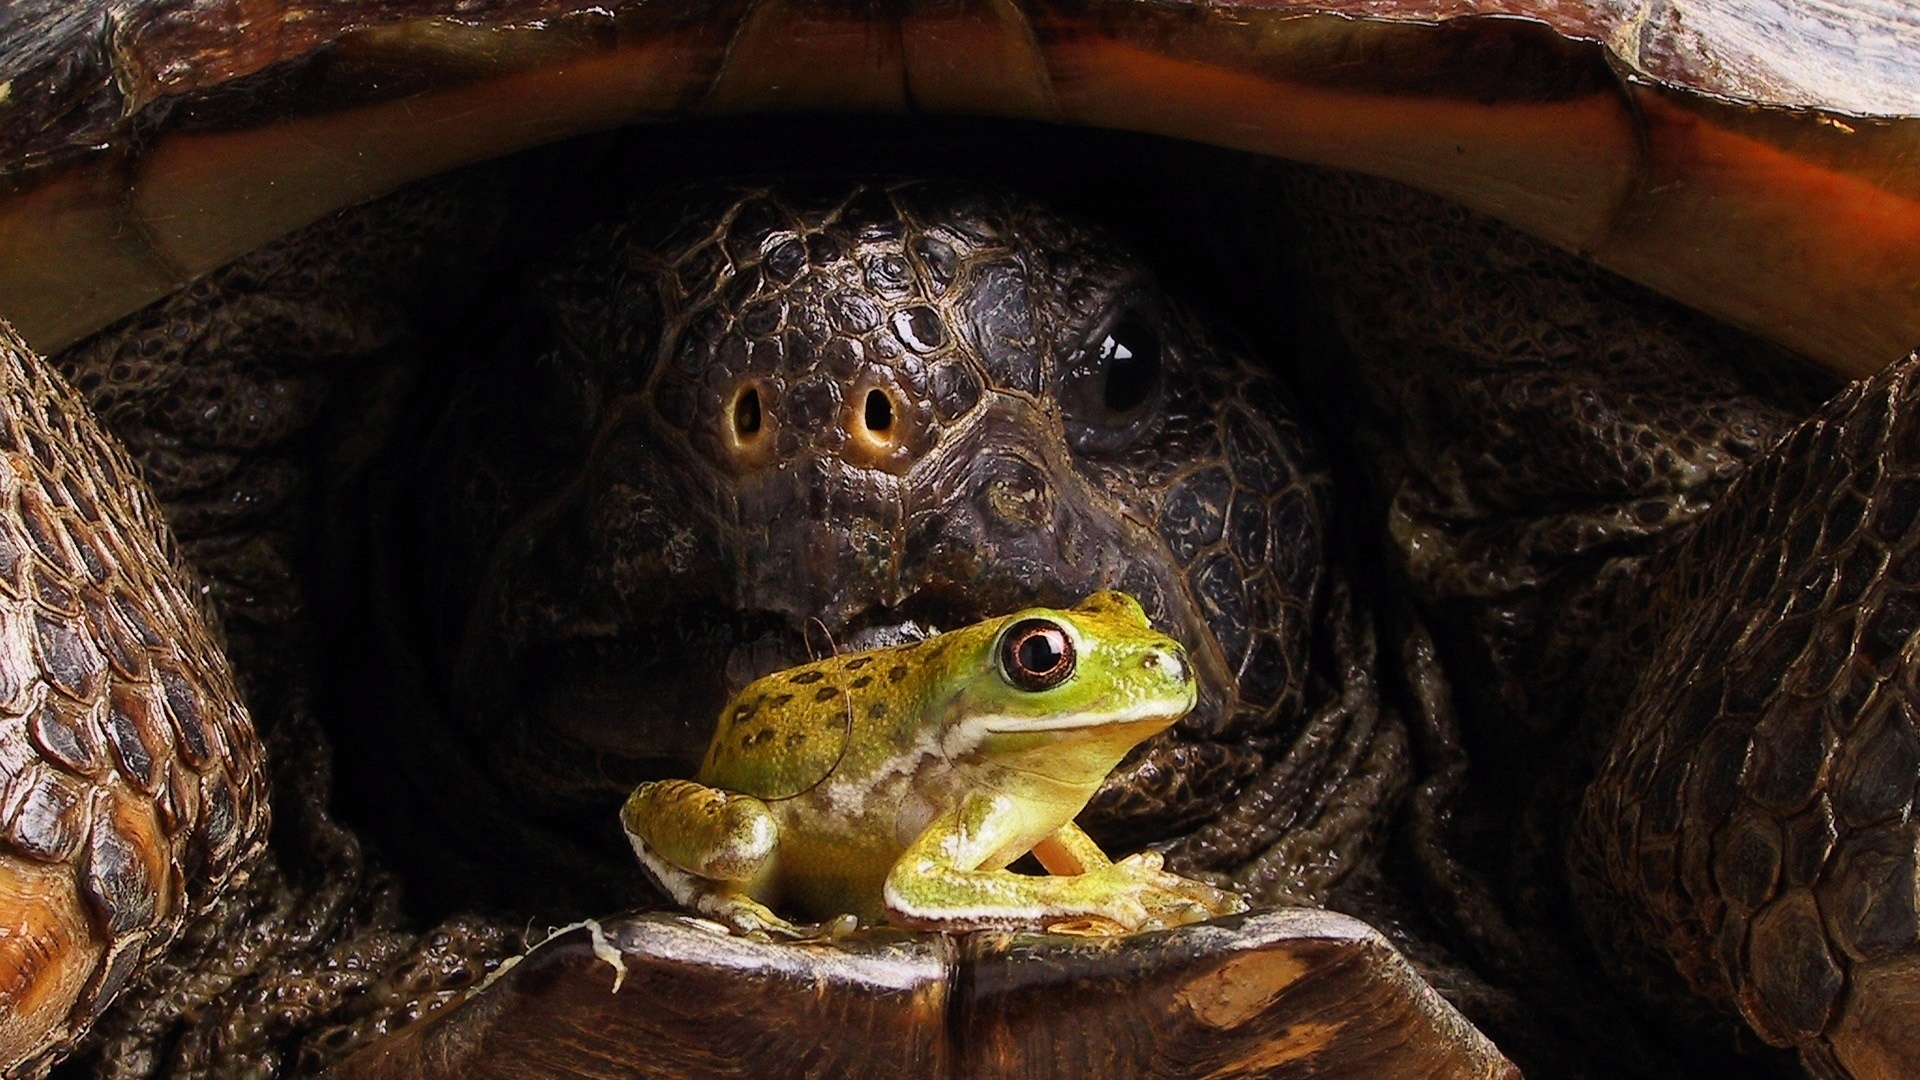 Big turtle and little frog for 1920 x 1080 HDTV 1080p resolution